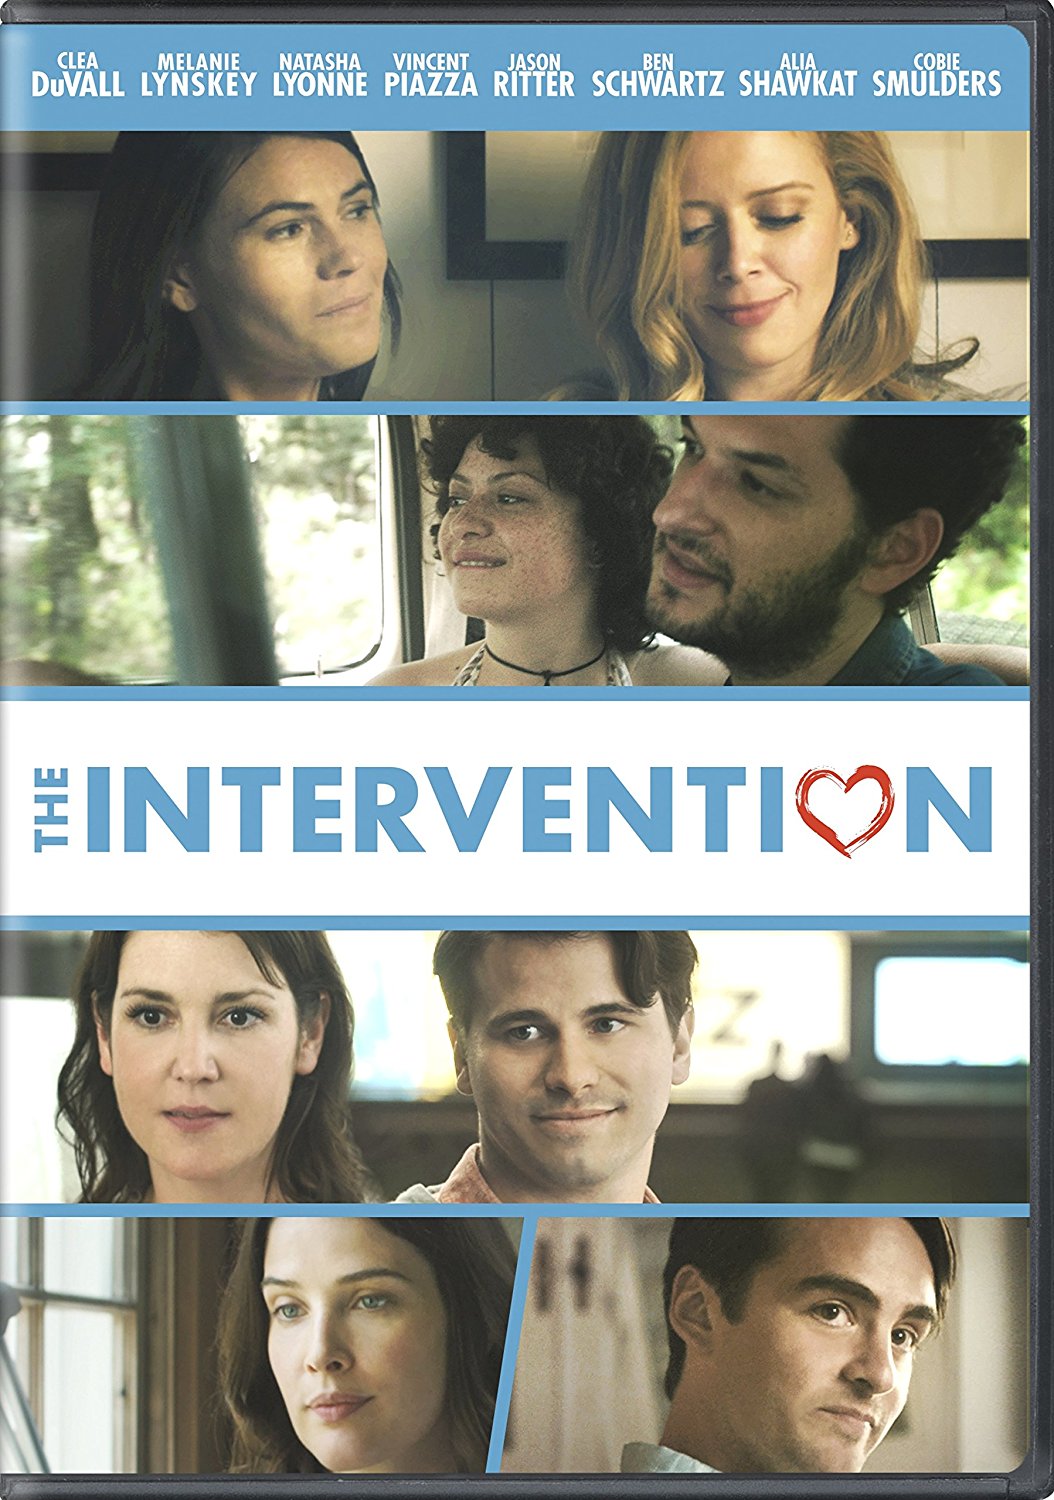 The Intervention DVD review